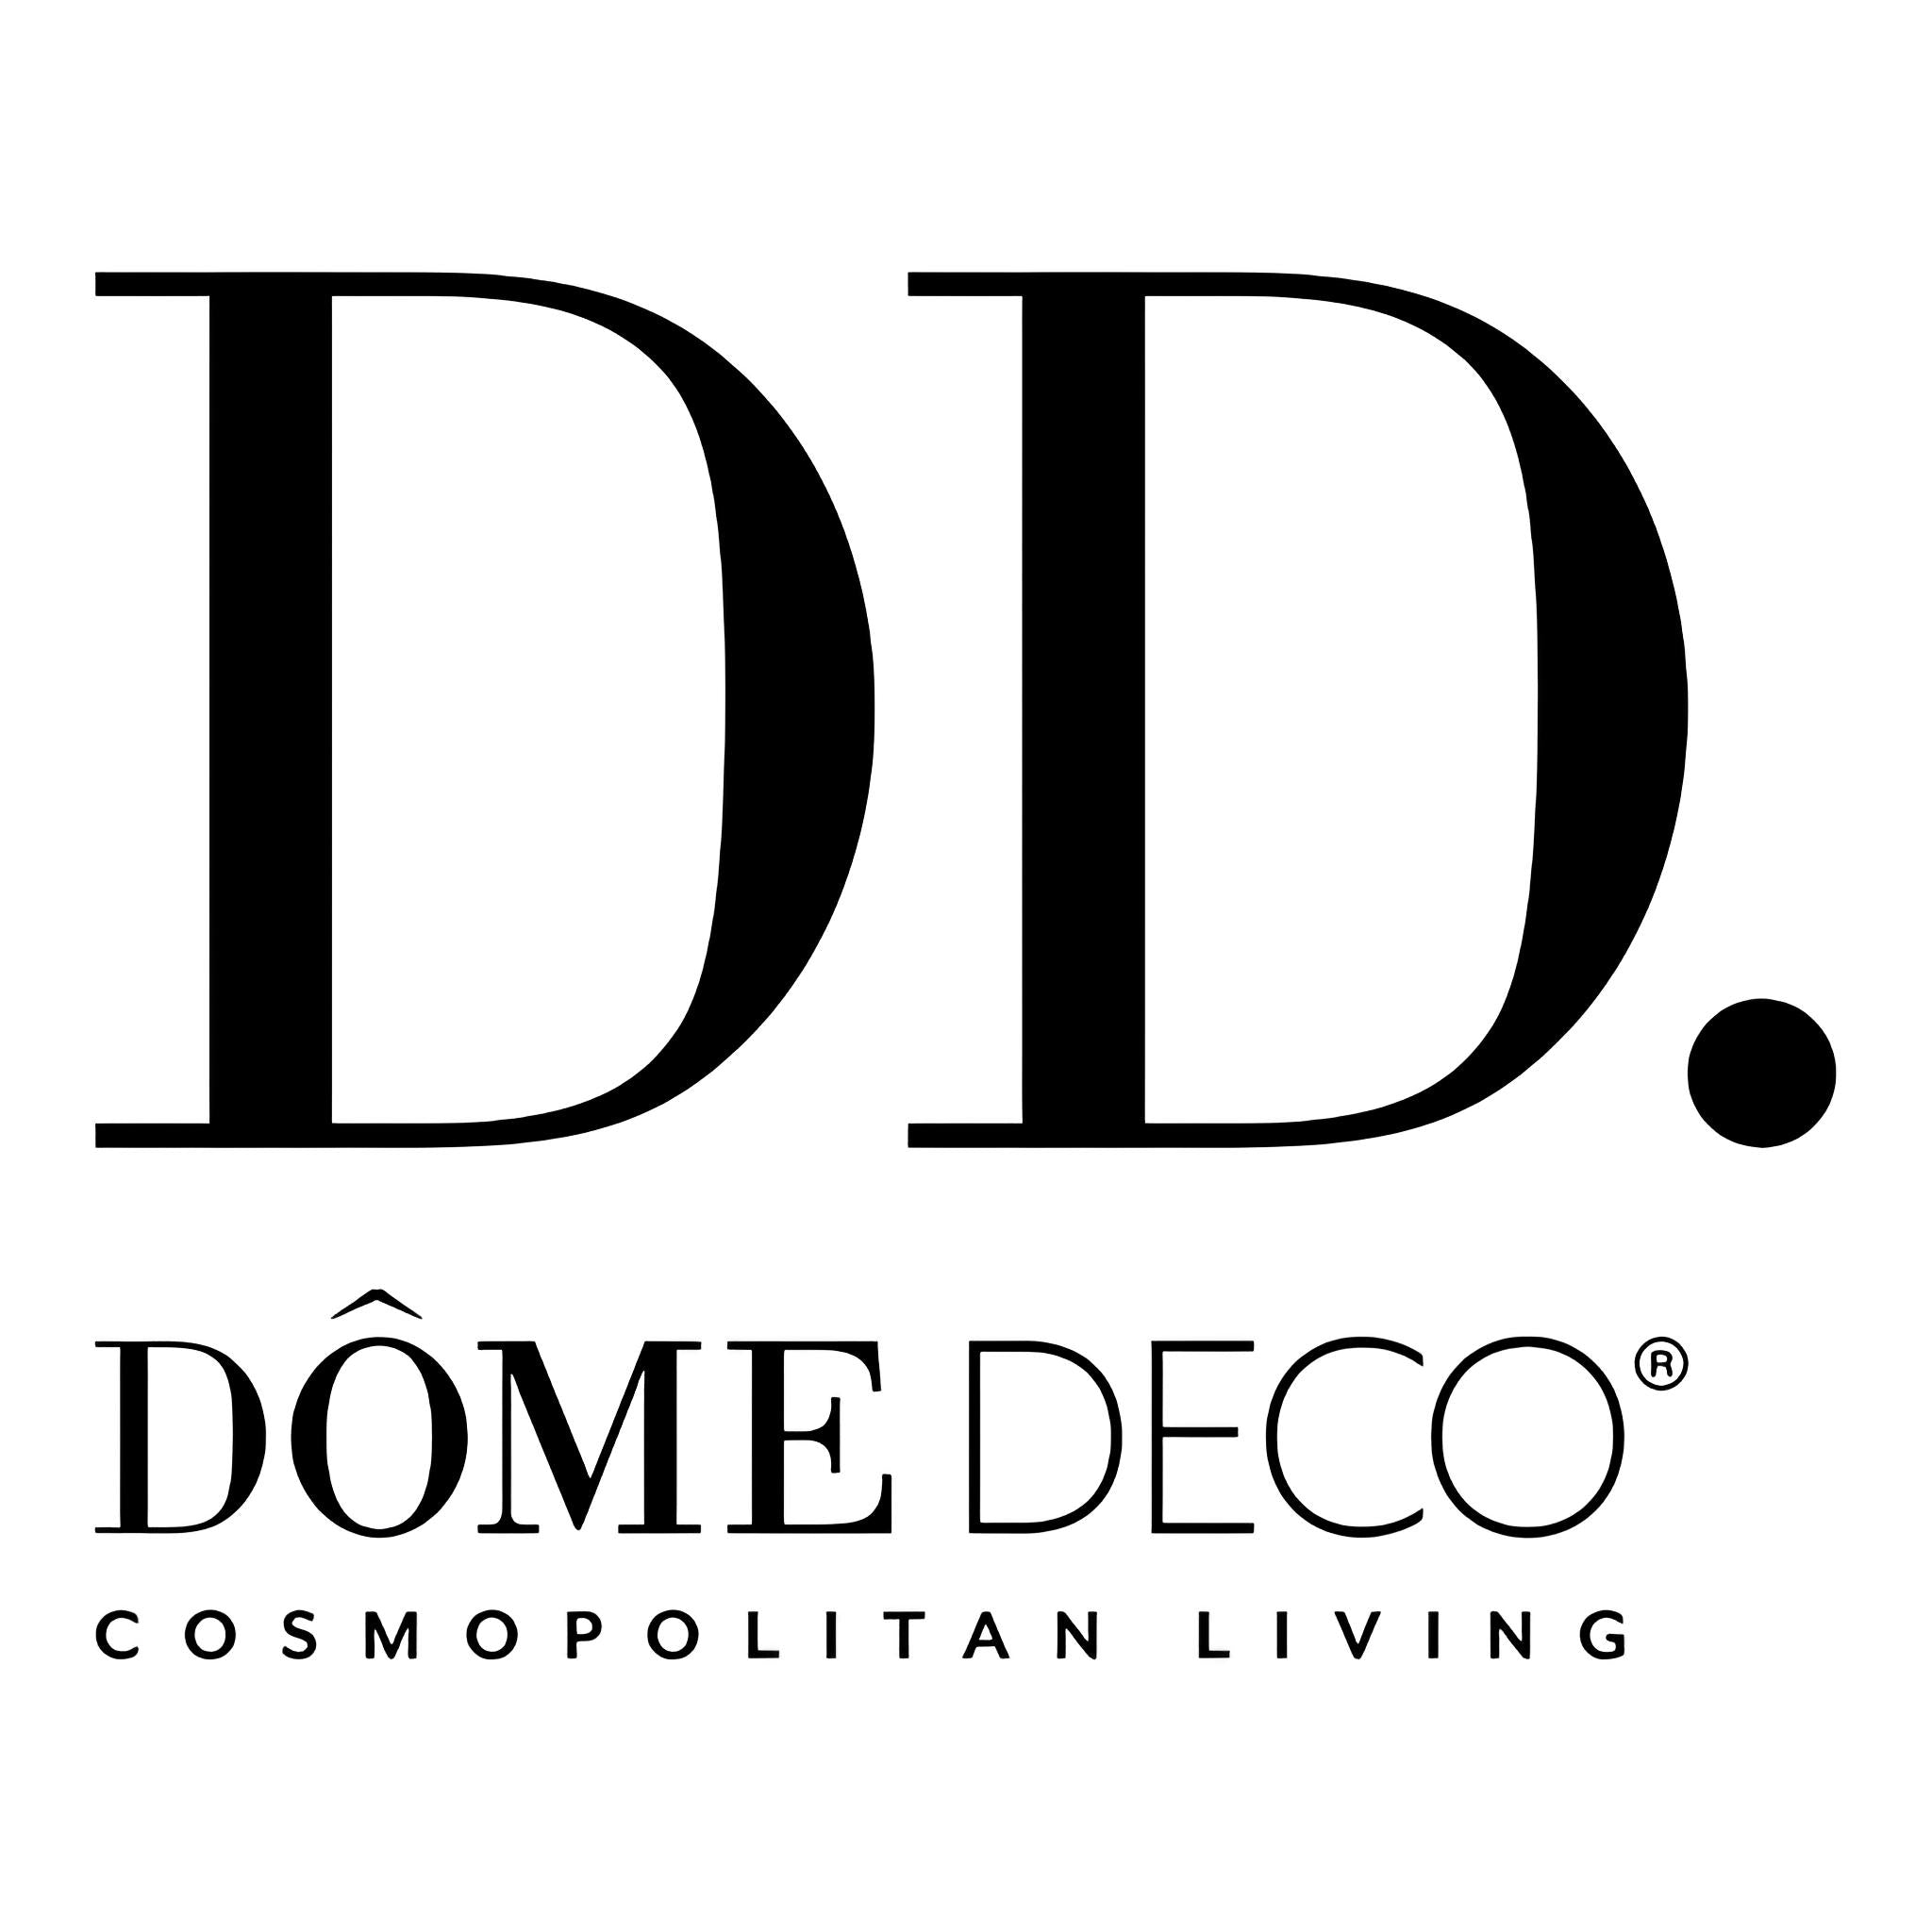 Dome-Deco-Featured_1.jpg